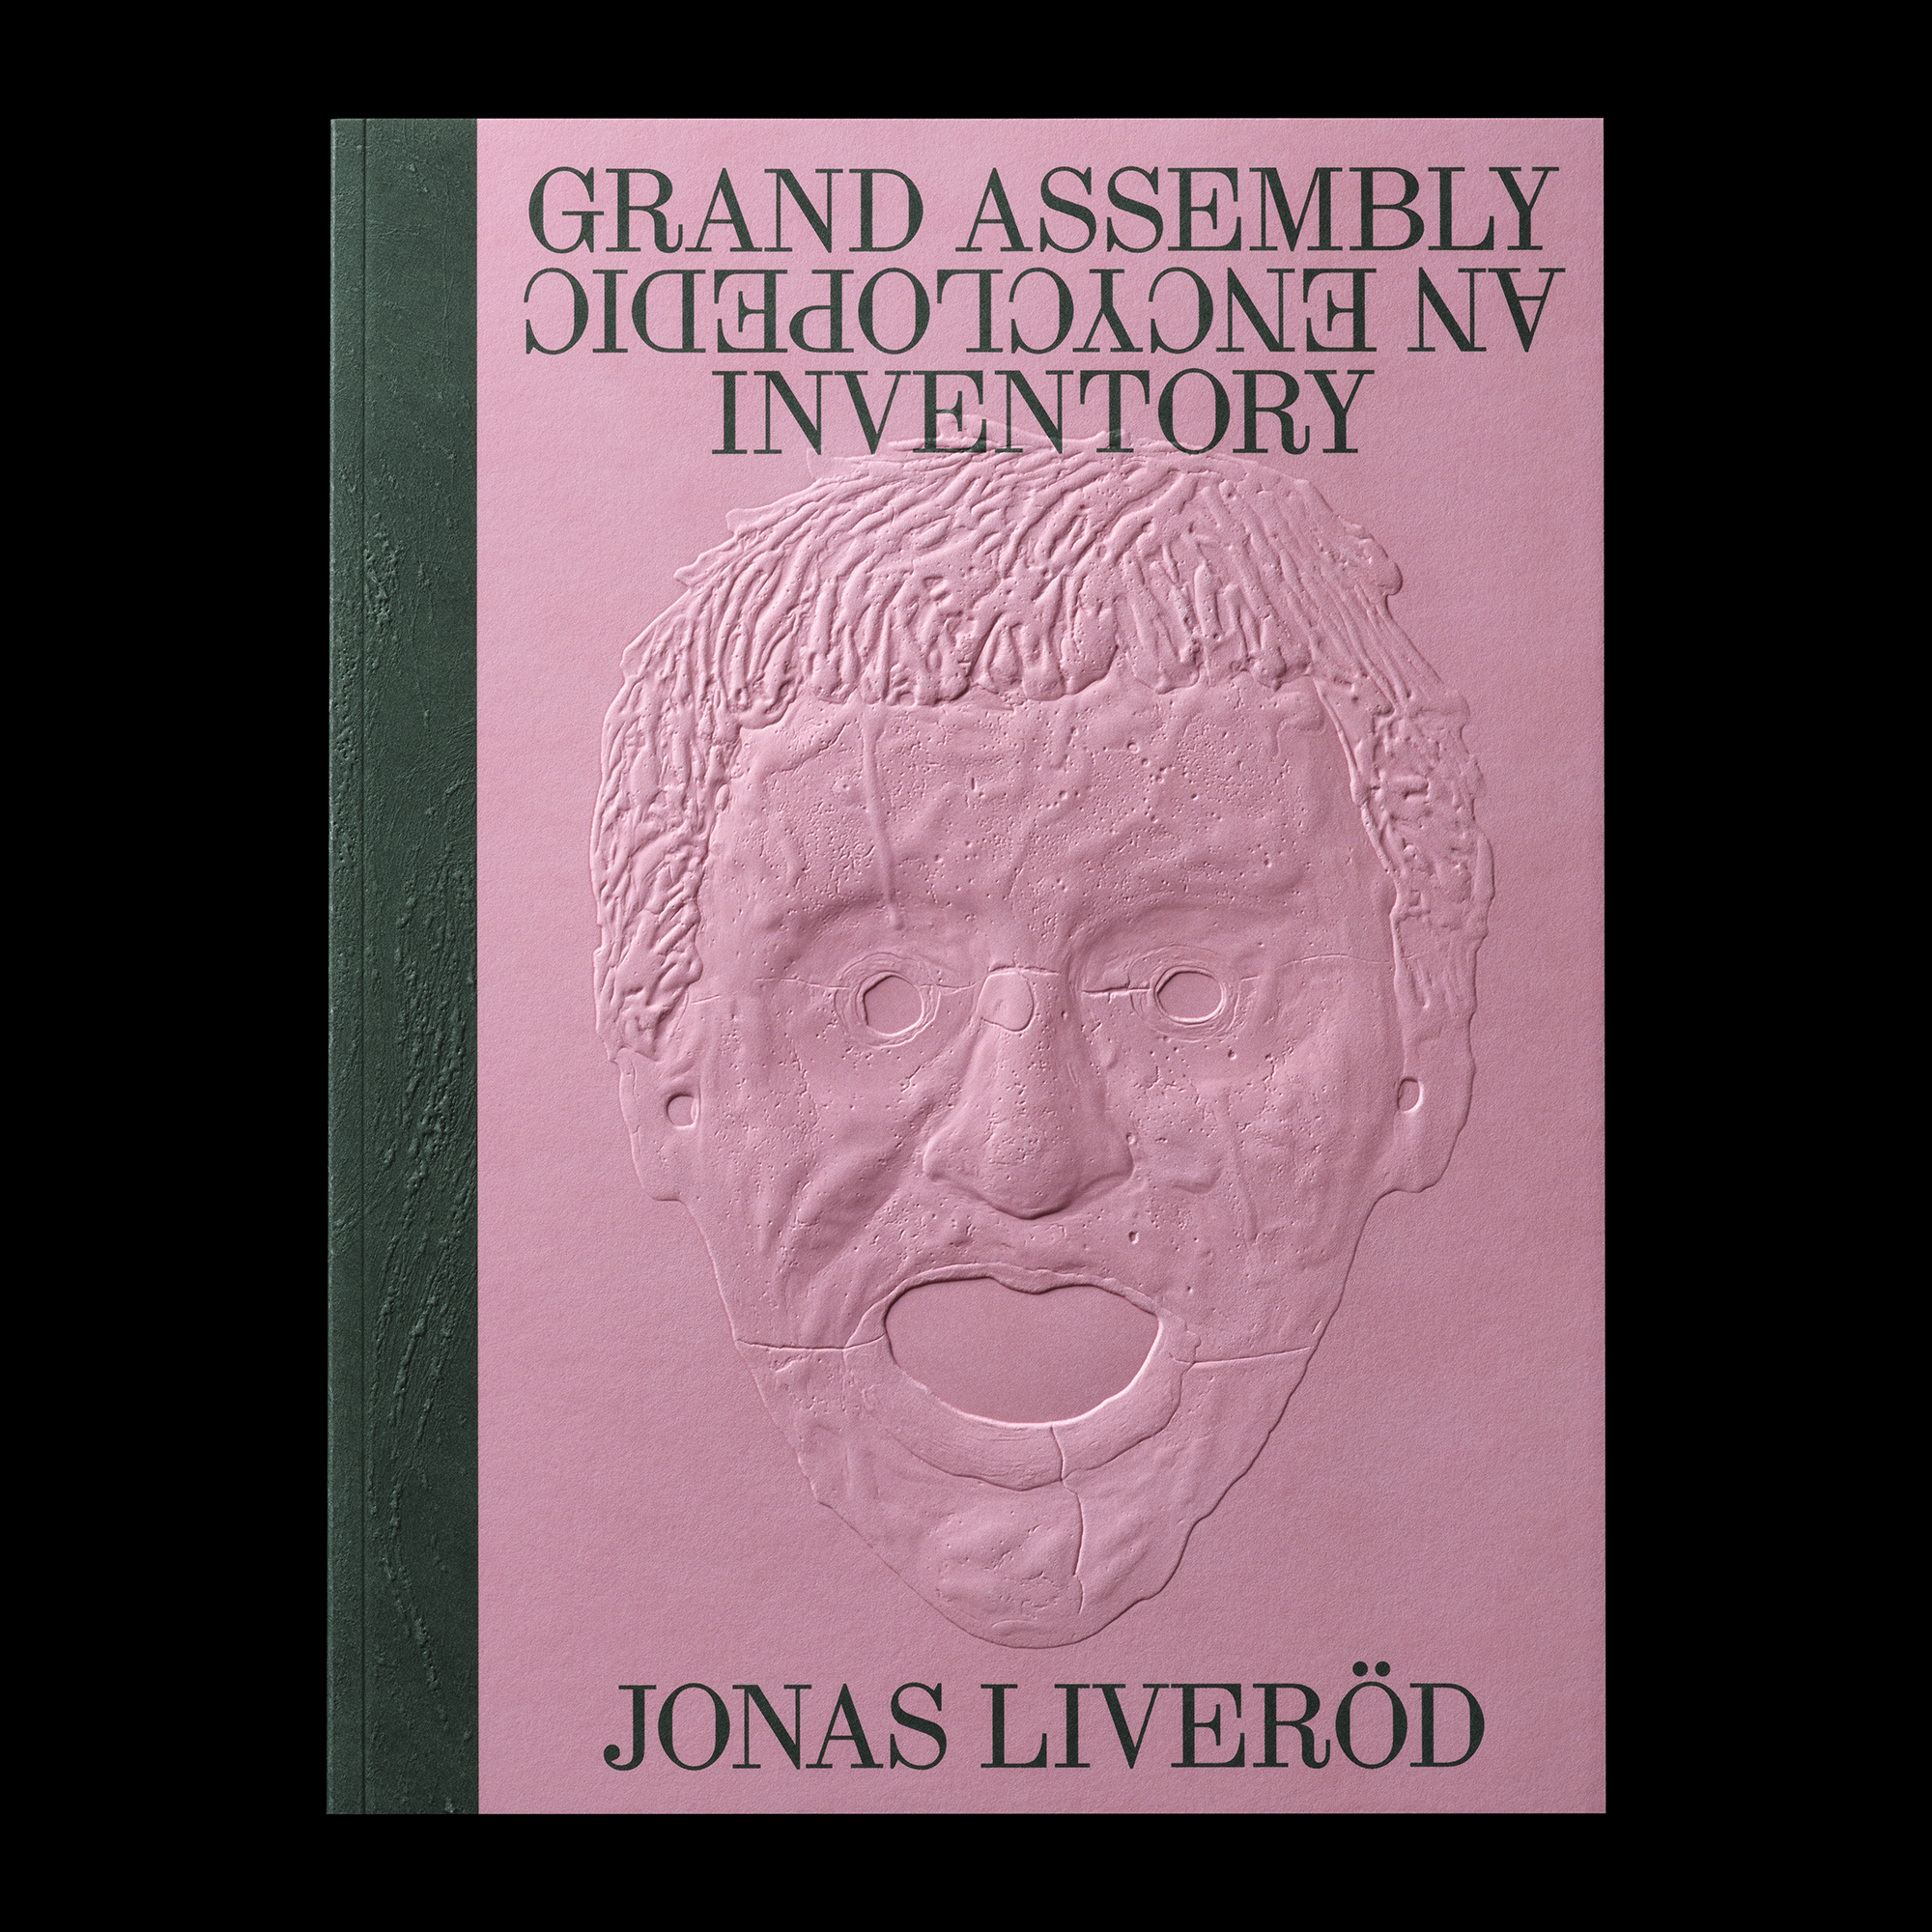 GRAND ASSEMBLY - the book